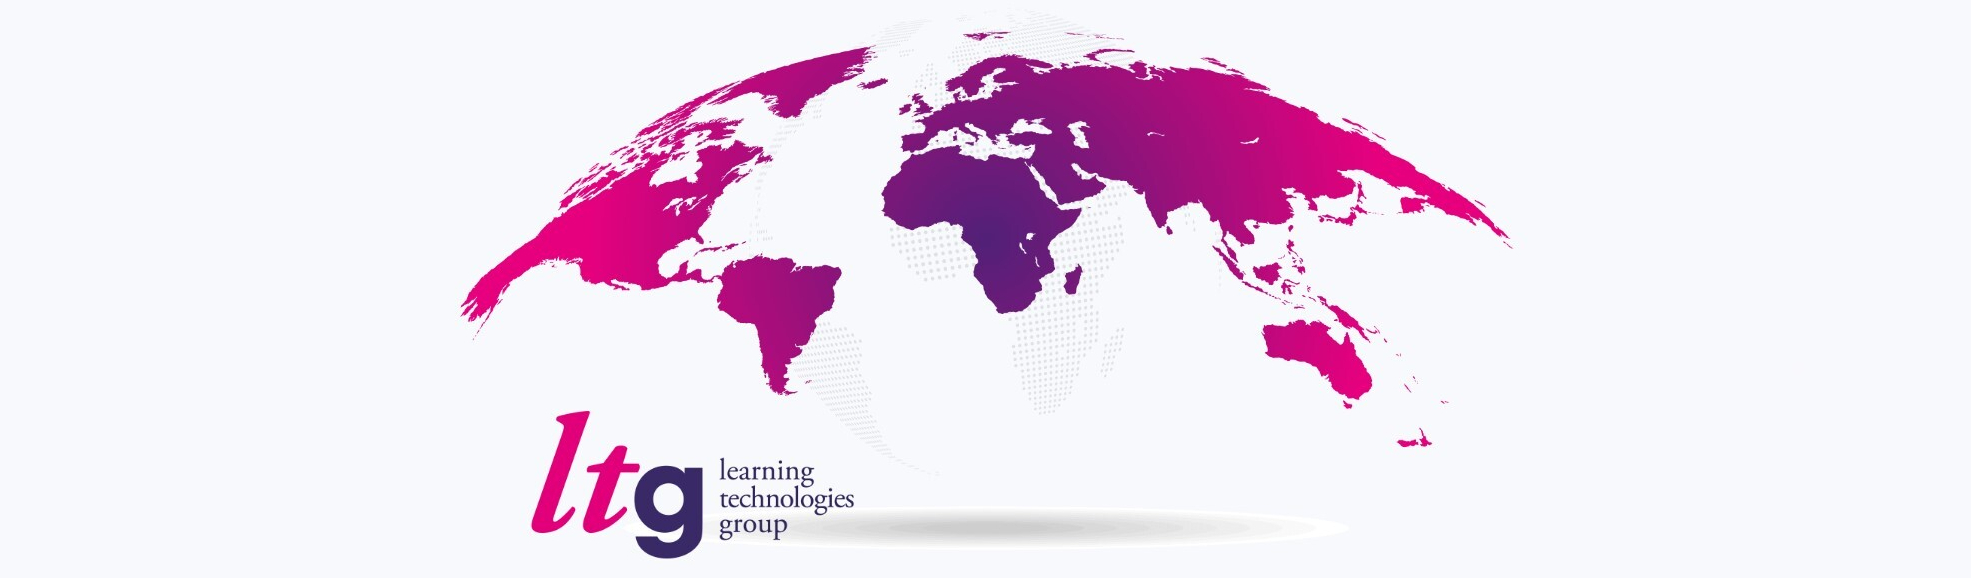 On a white background, a map in the shape of a globe is printed in pink and purple, with the Learining Technologies Group Plc emblem in the left corner.